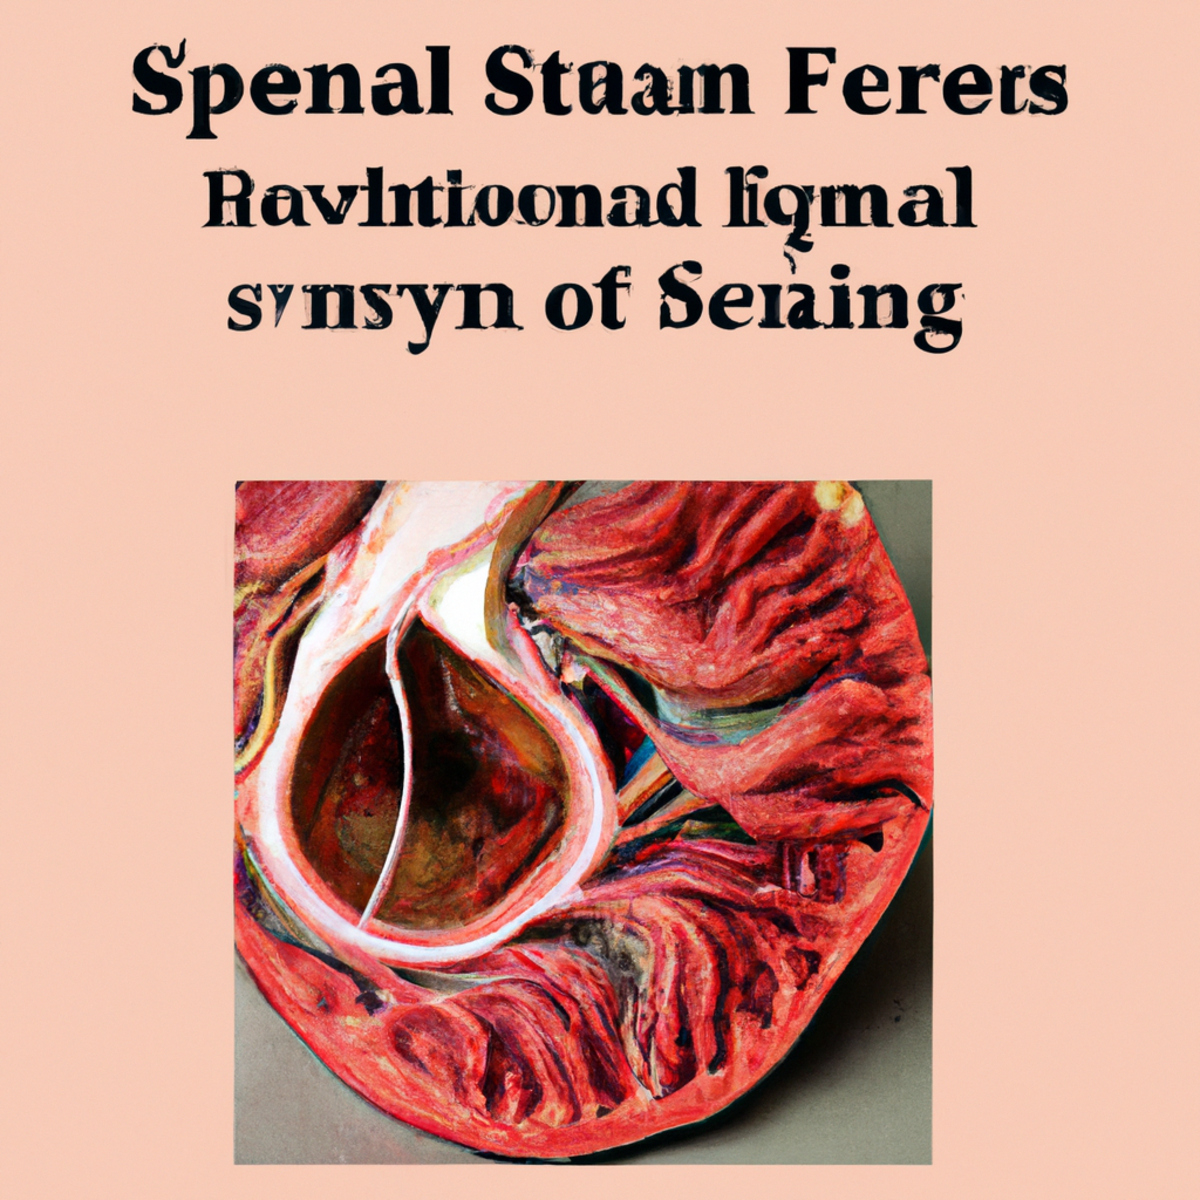 Close-up photo of human spleen specimen, illustrating intricate structure and characteristics. Visual aid for understanding spleen disorders - Felty syndrome